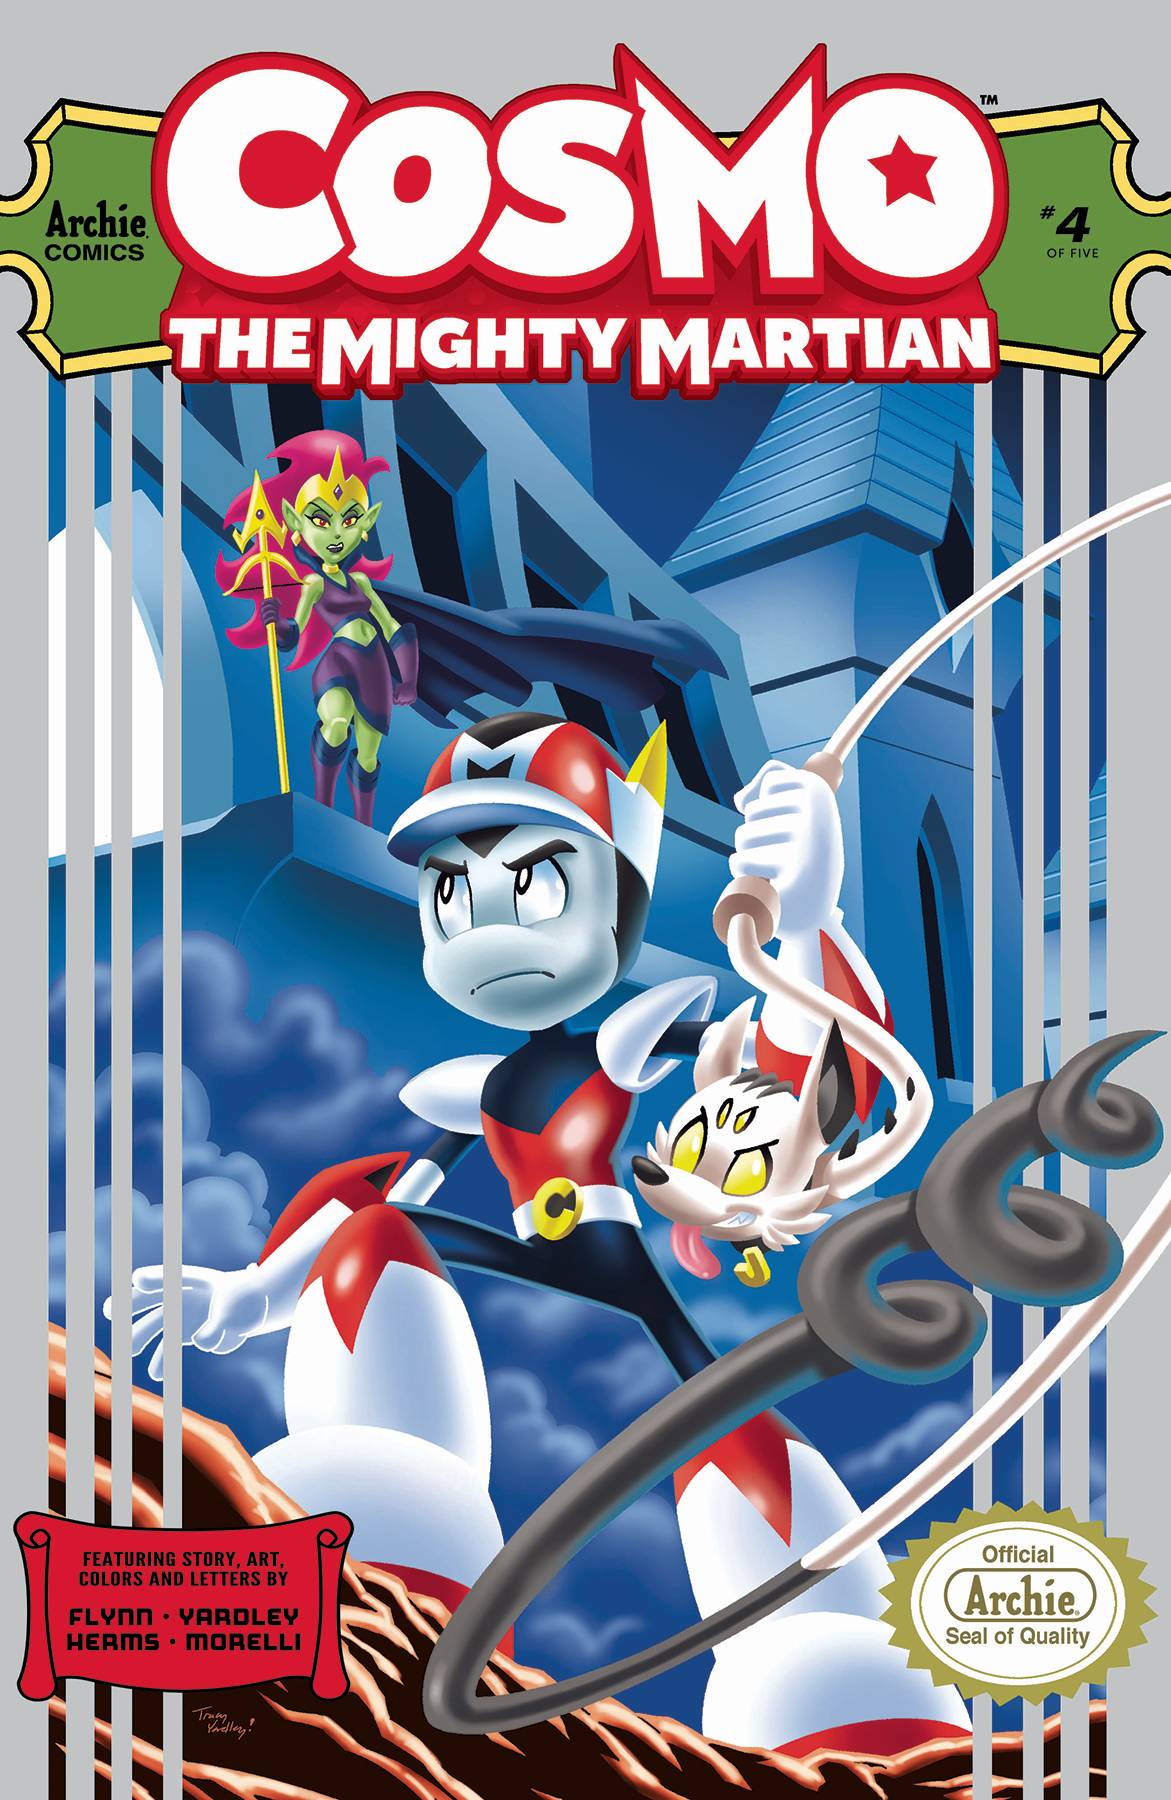 Cosmo: The Mighty Martian #4 (2020)